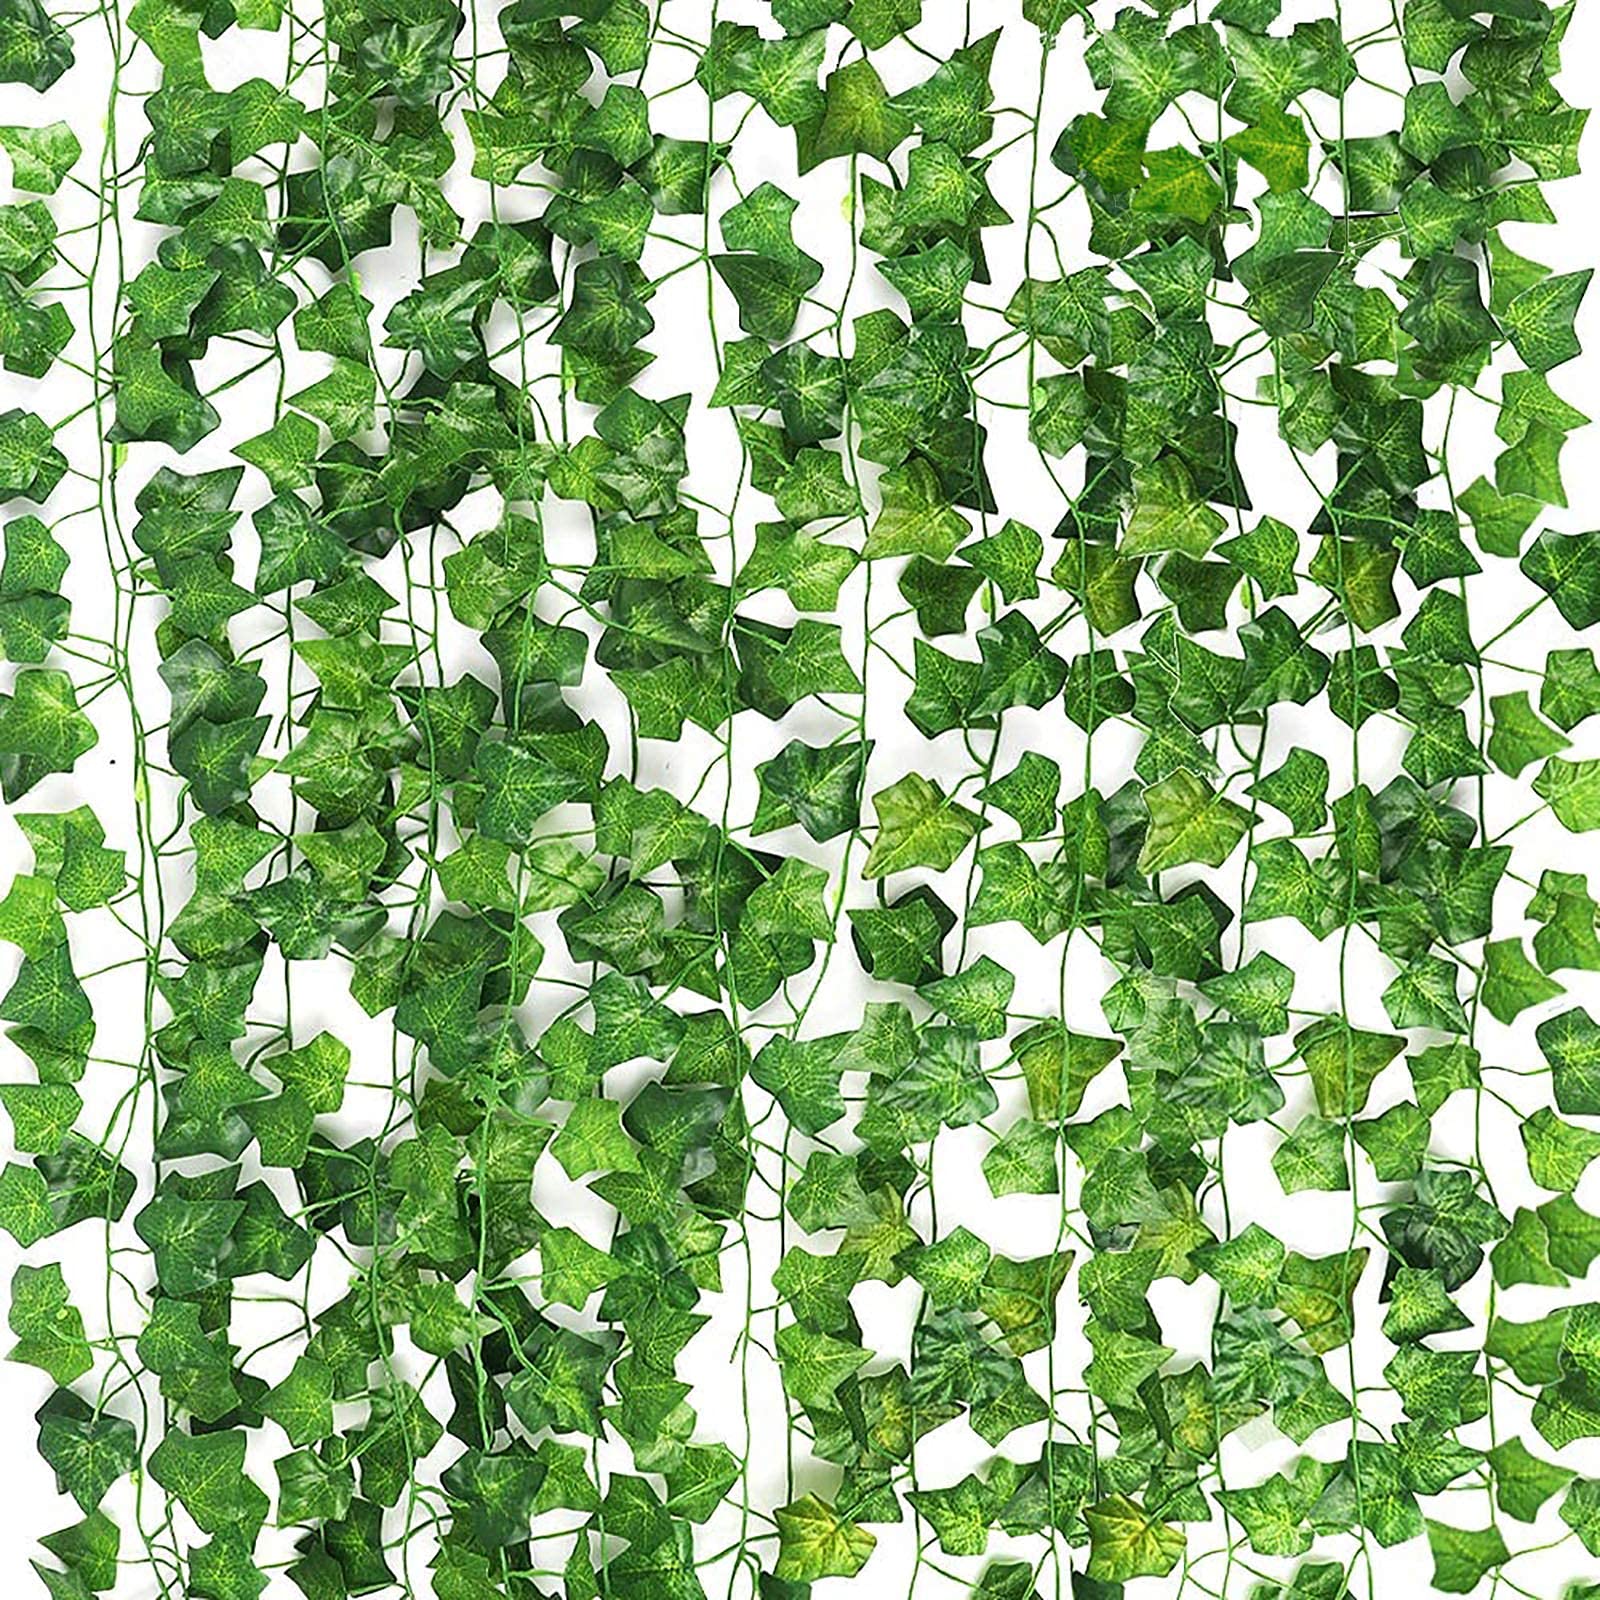 

12pcs Vines Garden Wall Decoration, Plastic Ivy Leaves Artificial Ivy Garland Greenery Garlands, Plastic Hanging Plant Vine For Bedroom Wedding Party Room Astethic Stuff, 79 Feet